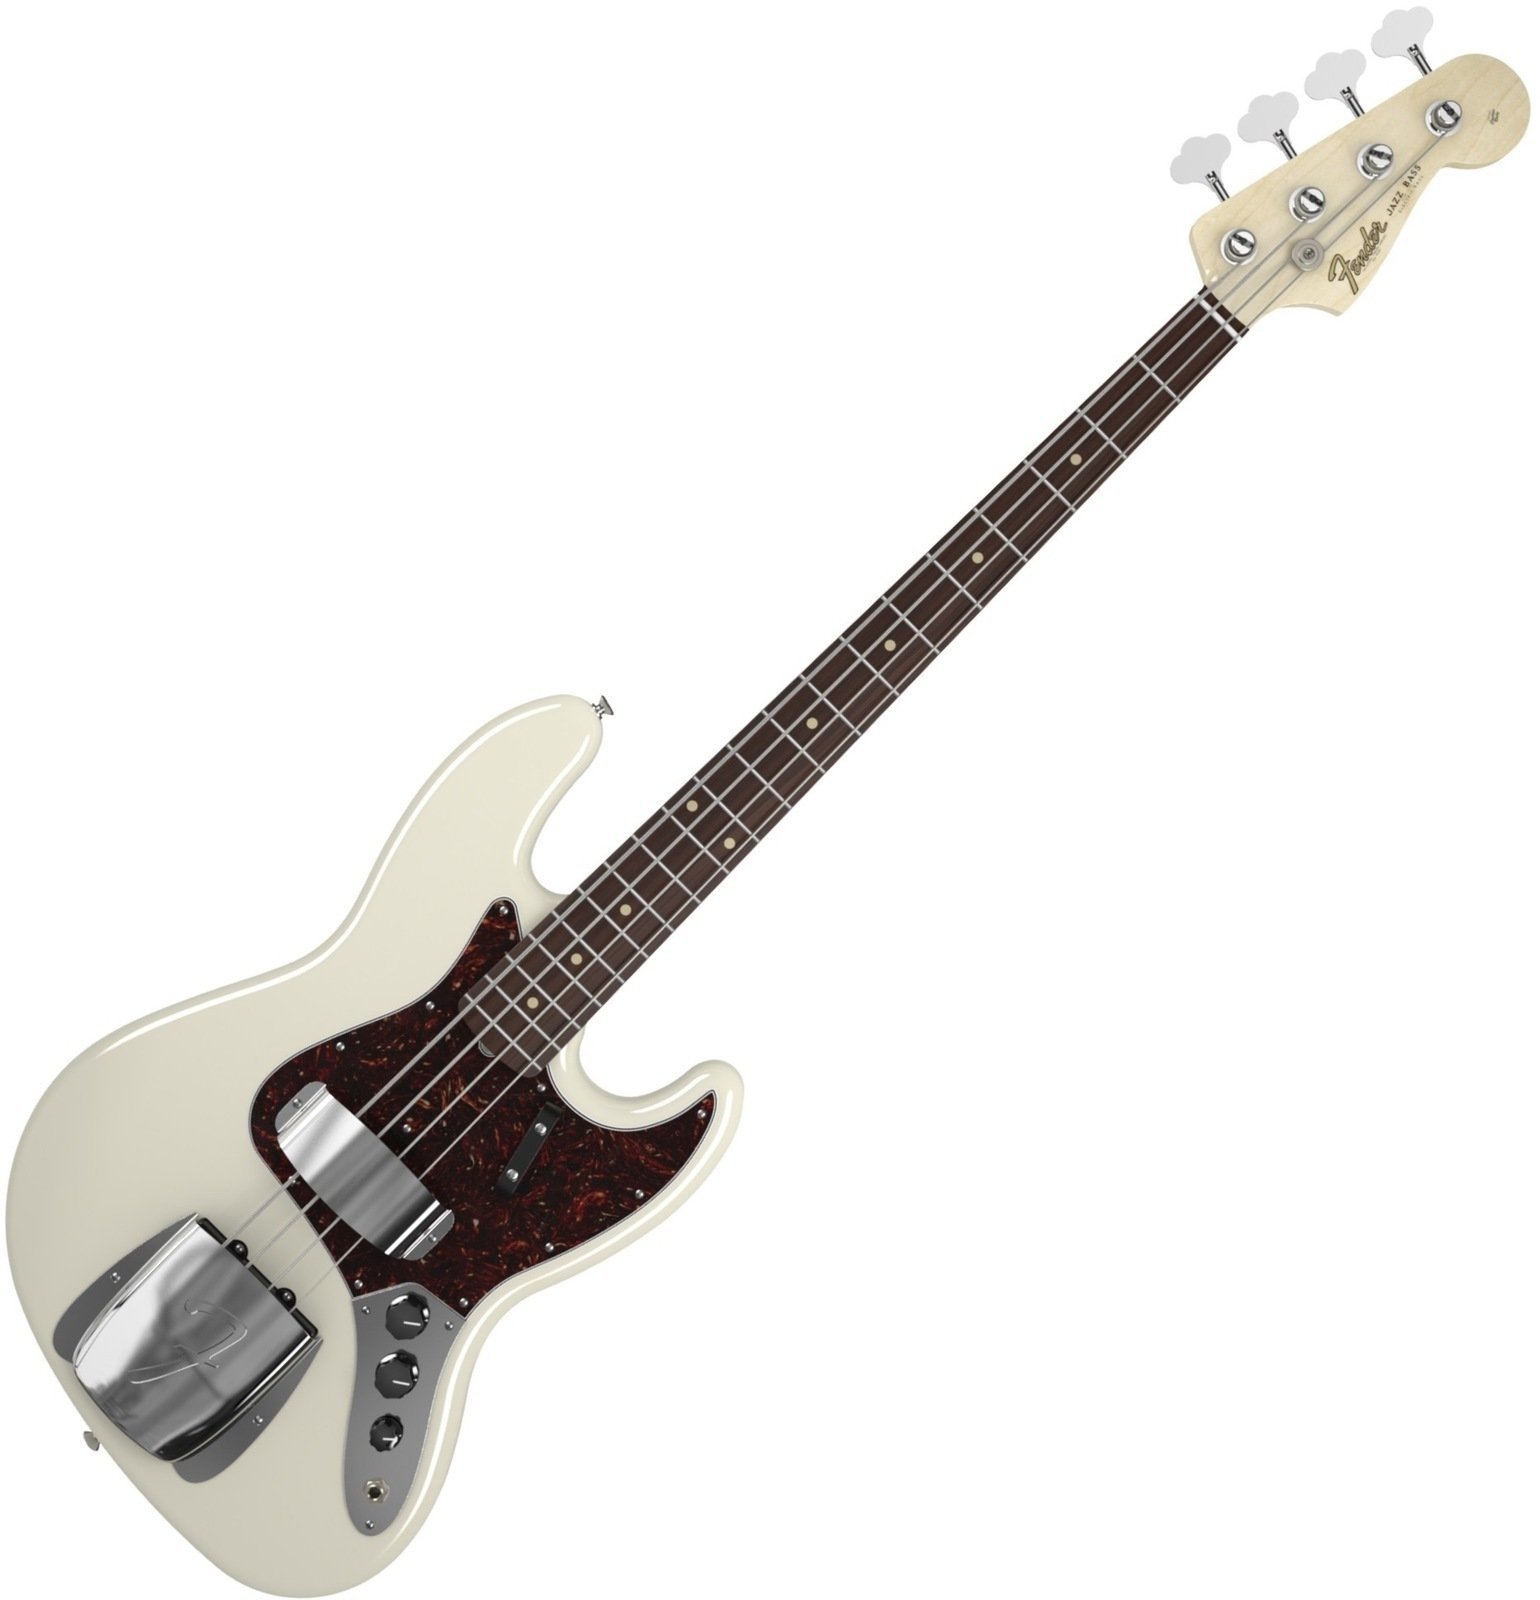 4-string Bassguitar Fender American Vintage '64 Jazz Bass, Round-Laminated Rosewood Fingerboard, Olympic White